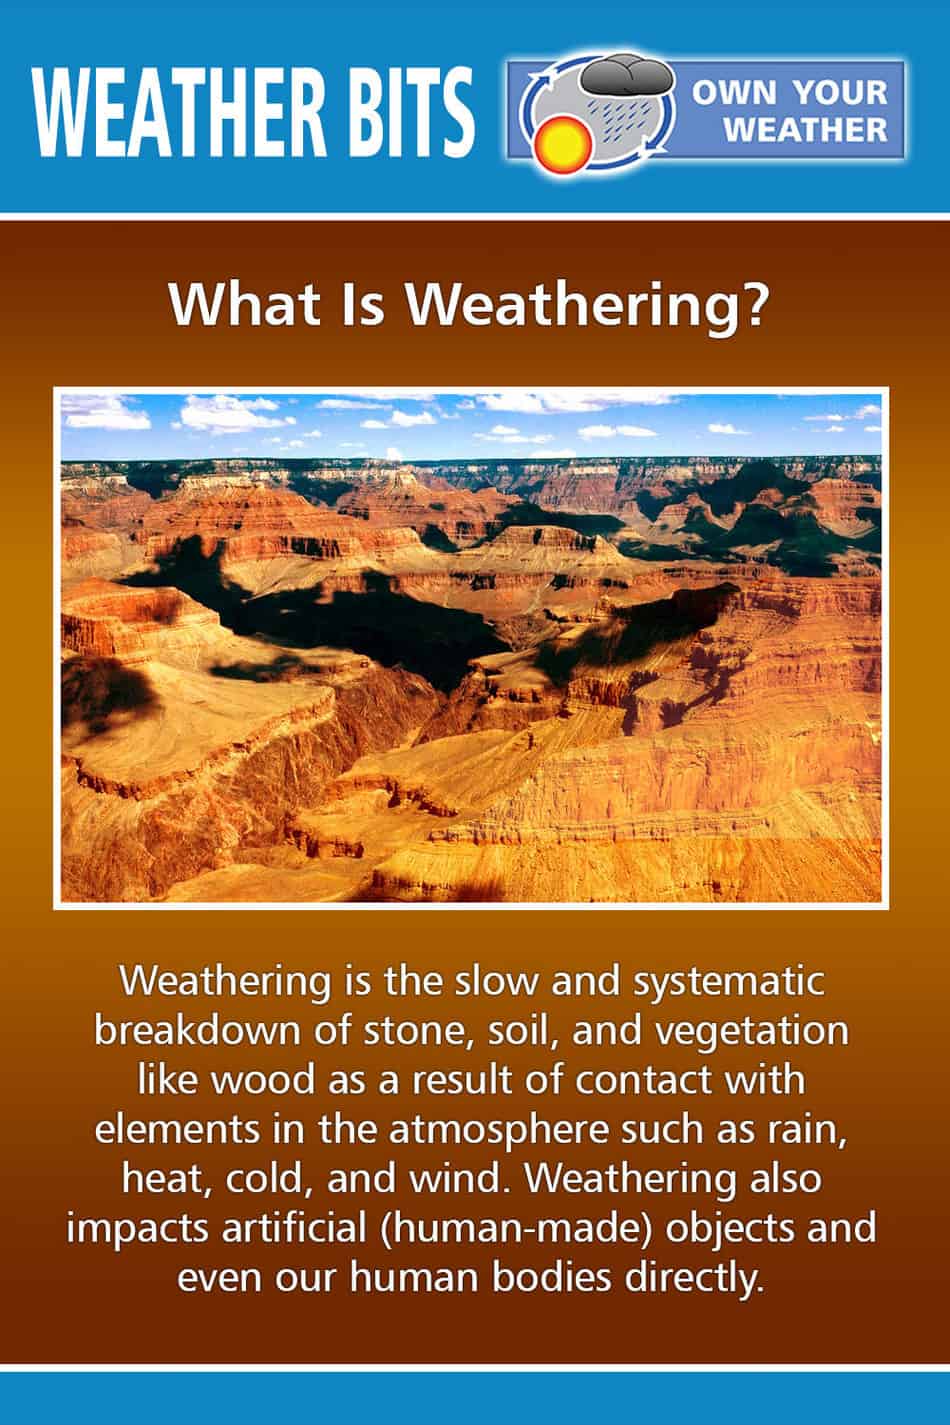 What Is Weathering?